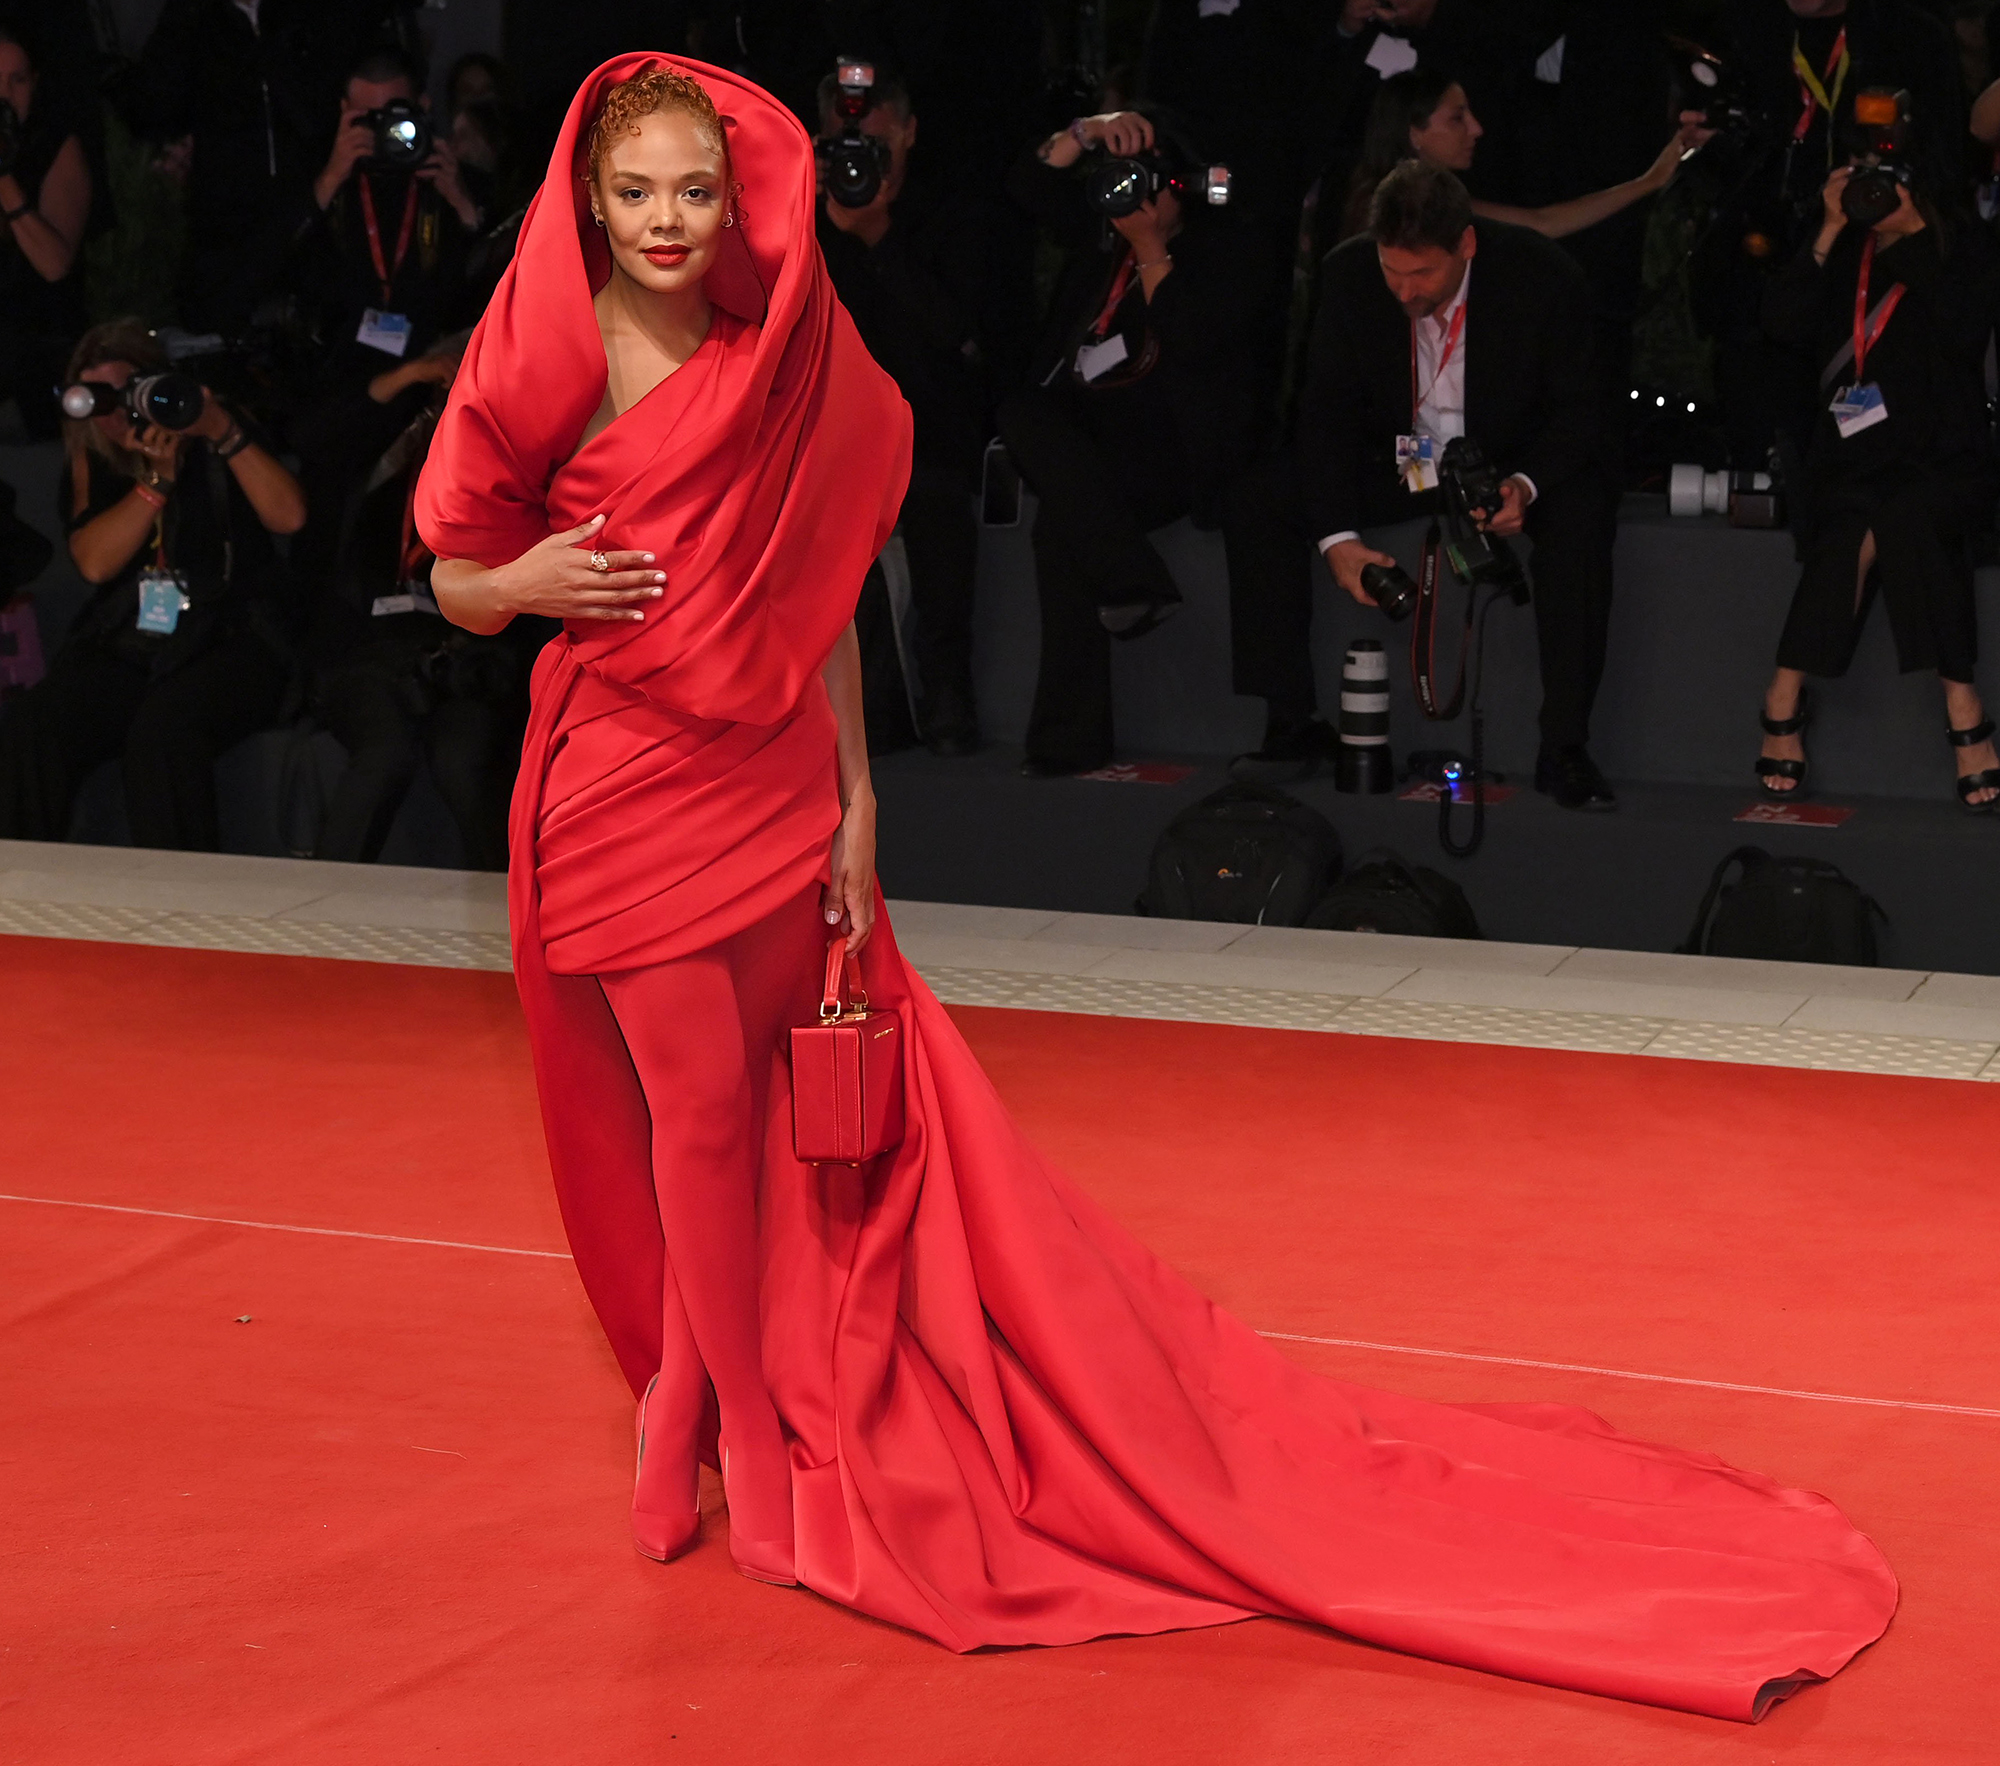 Venice Film Festival 2022: See the Red Carpet Looks